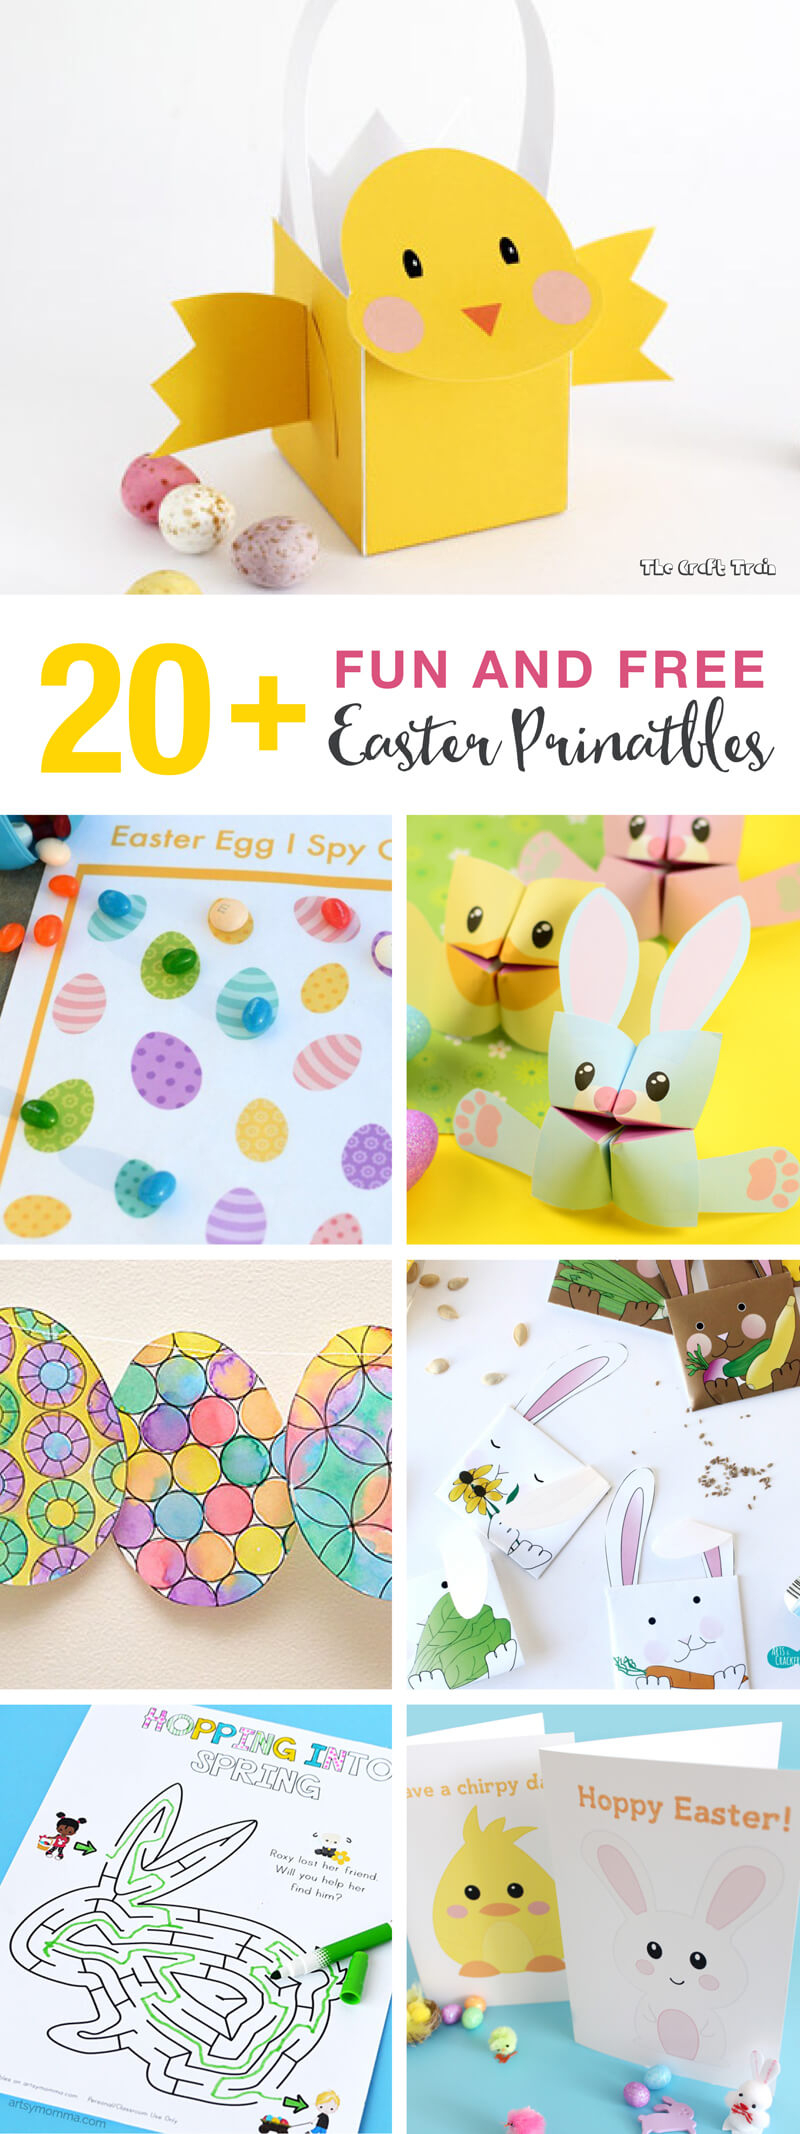 20+ Fun And Free Easter Printables For Kids | The Craft Train - Free Printable Easter Decorations